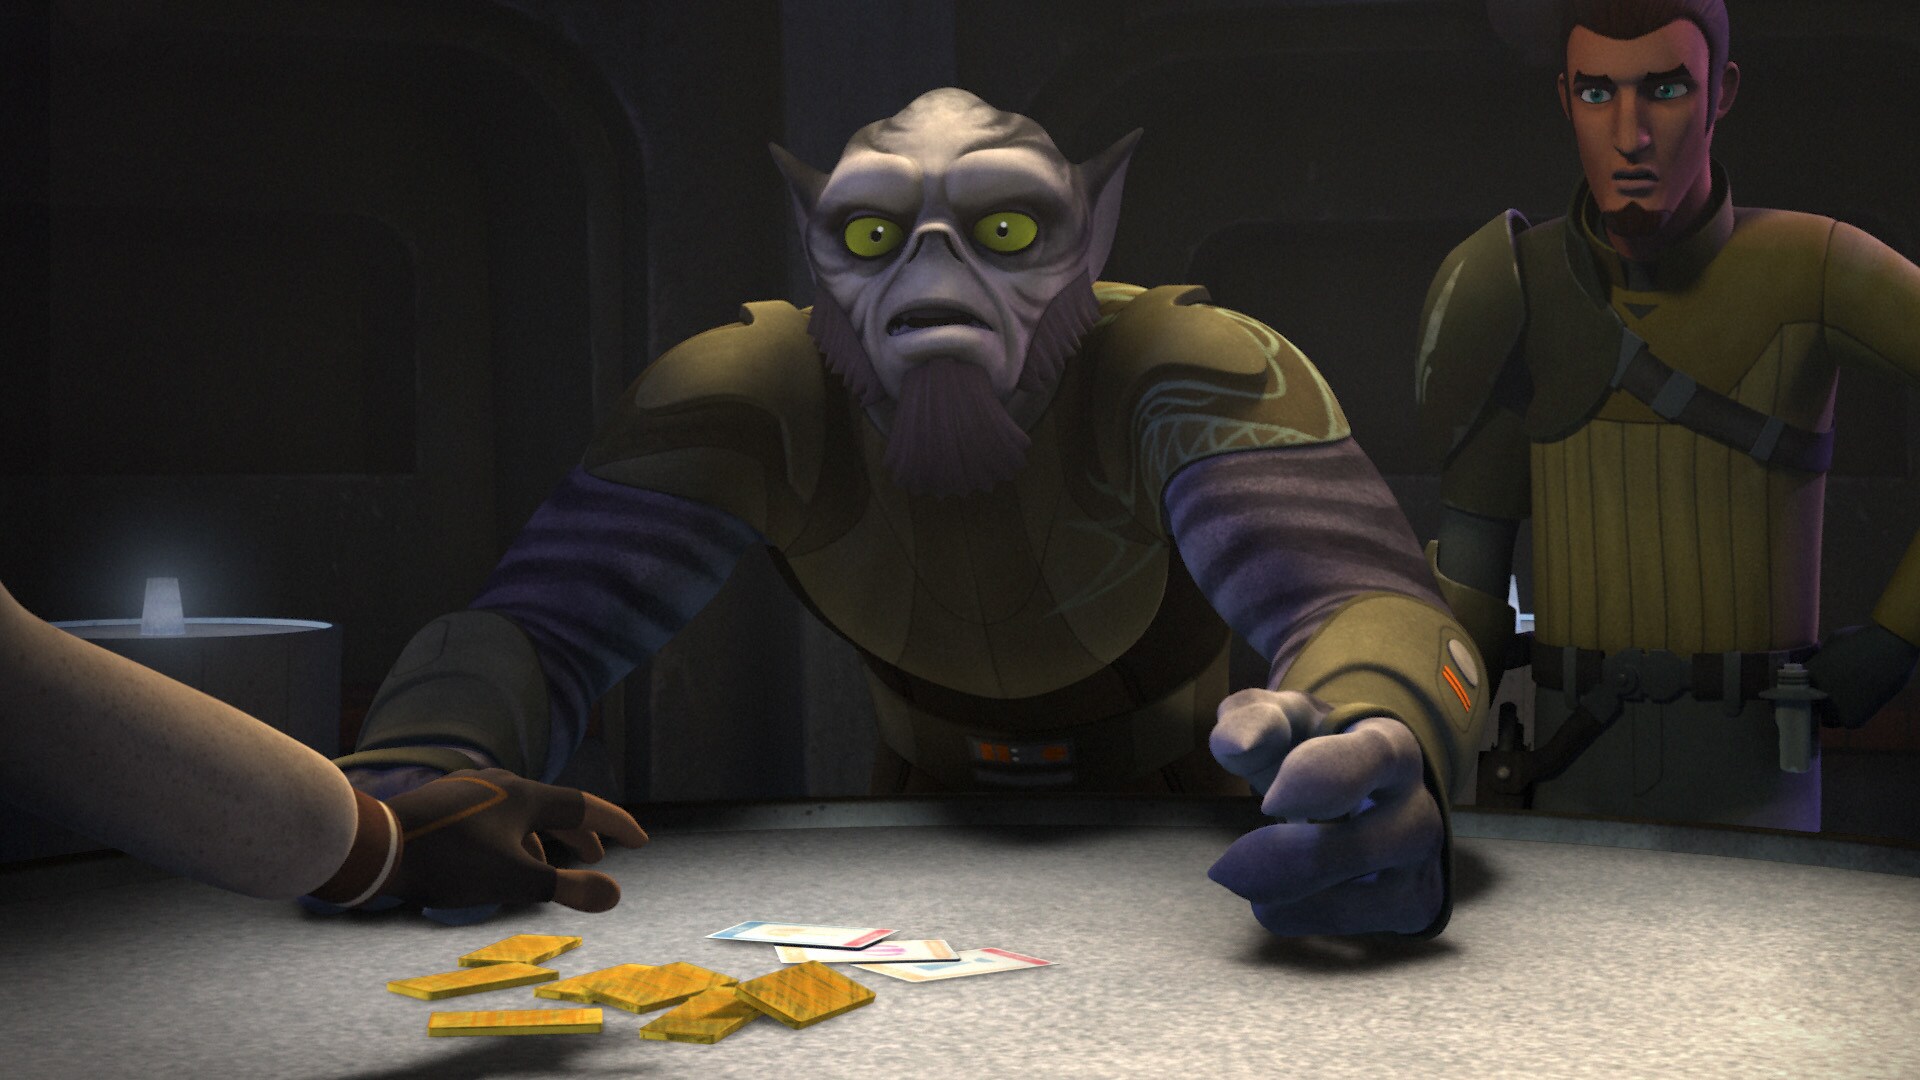 Zeb shows his cards, and begins to claim the pot. "Not so fast," the stranger says. "It appears I...